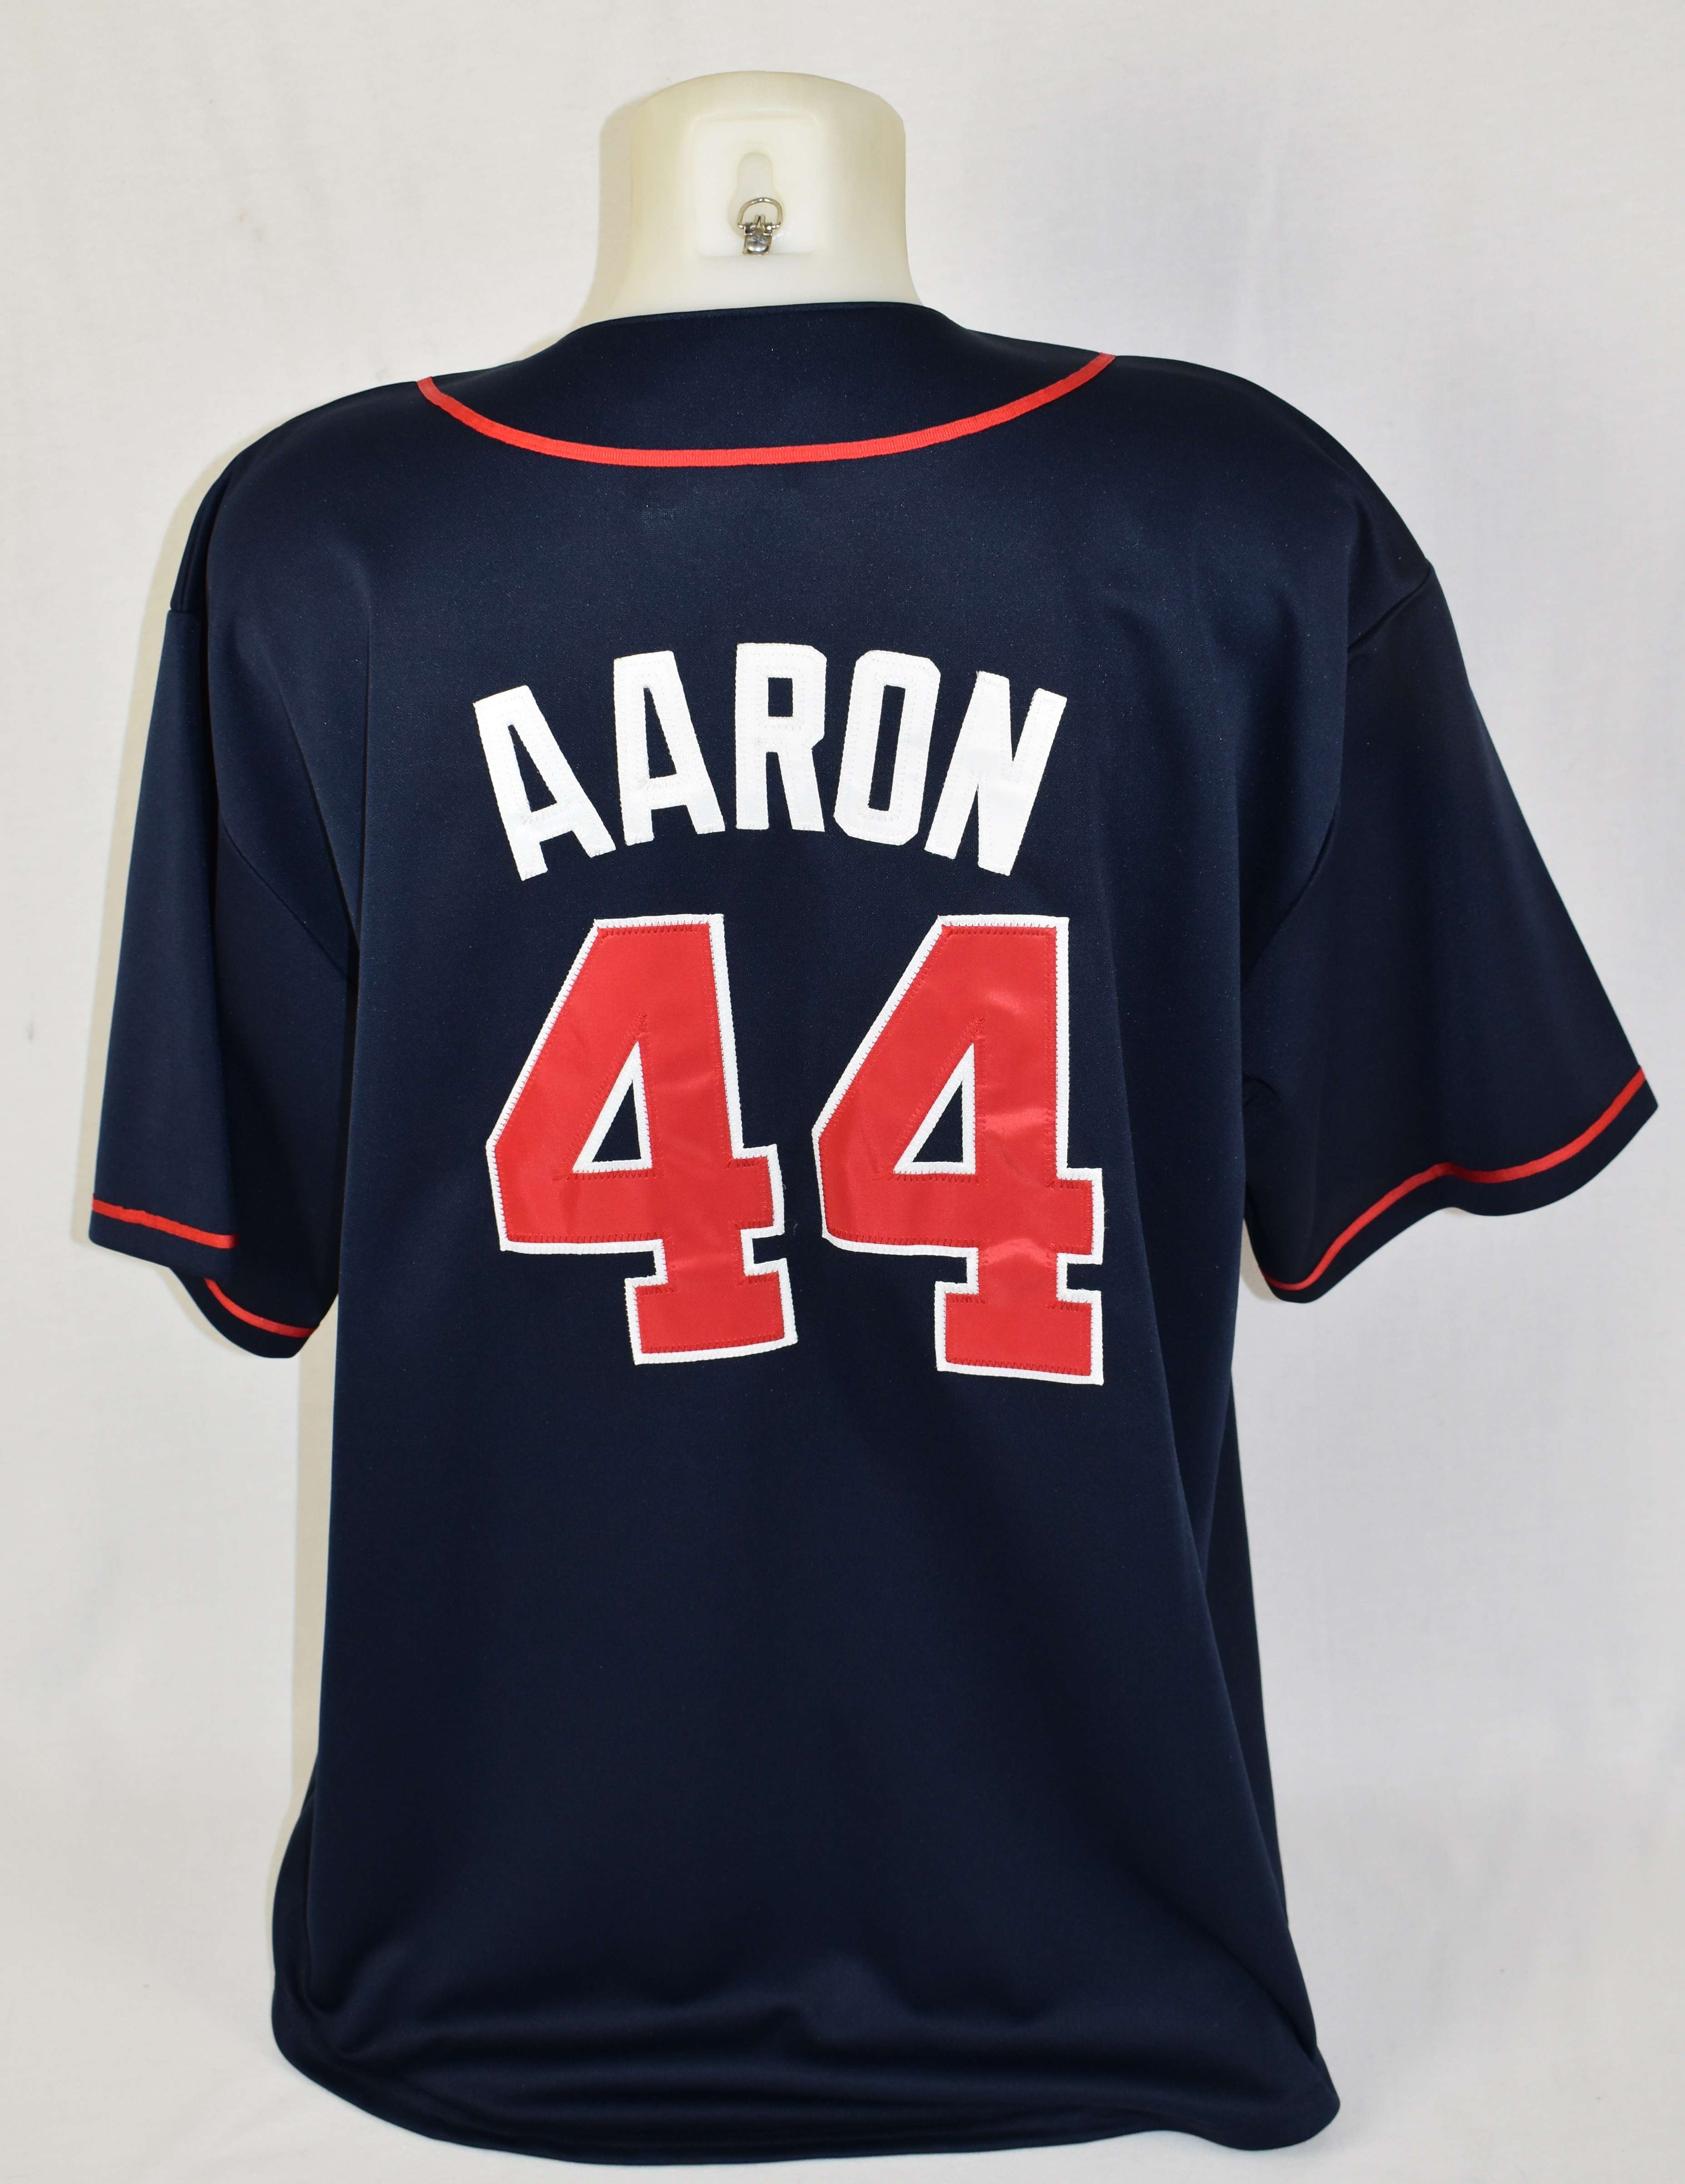 Hank Aaron Braves jersey fetches over $100,000 at auction - Atlanta  Business Chronicle